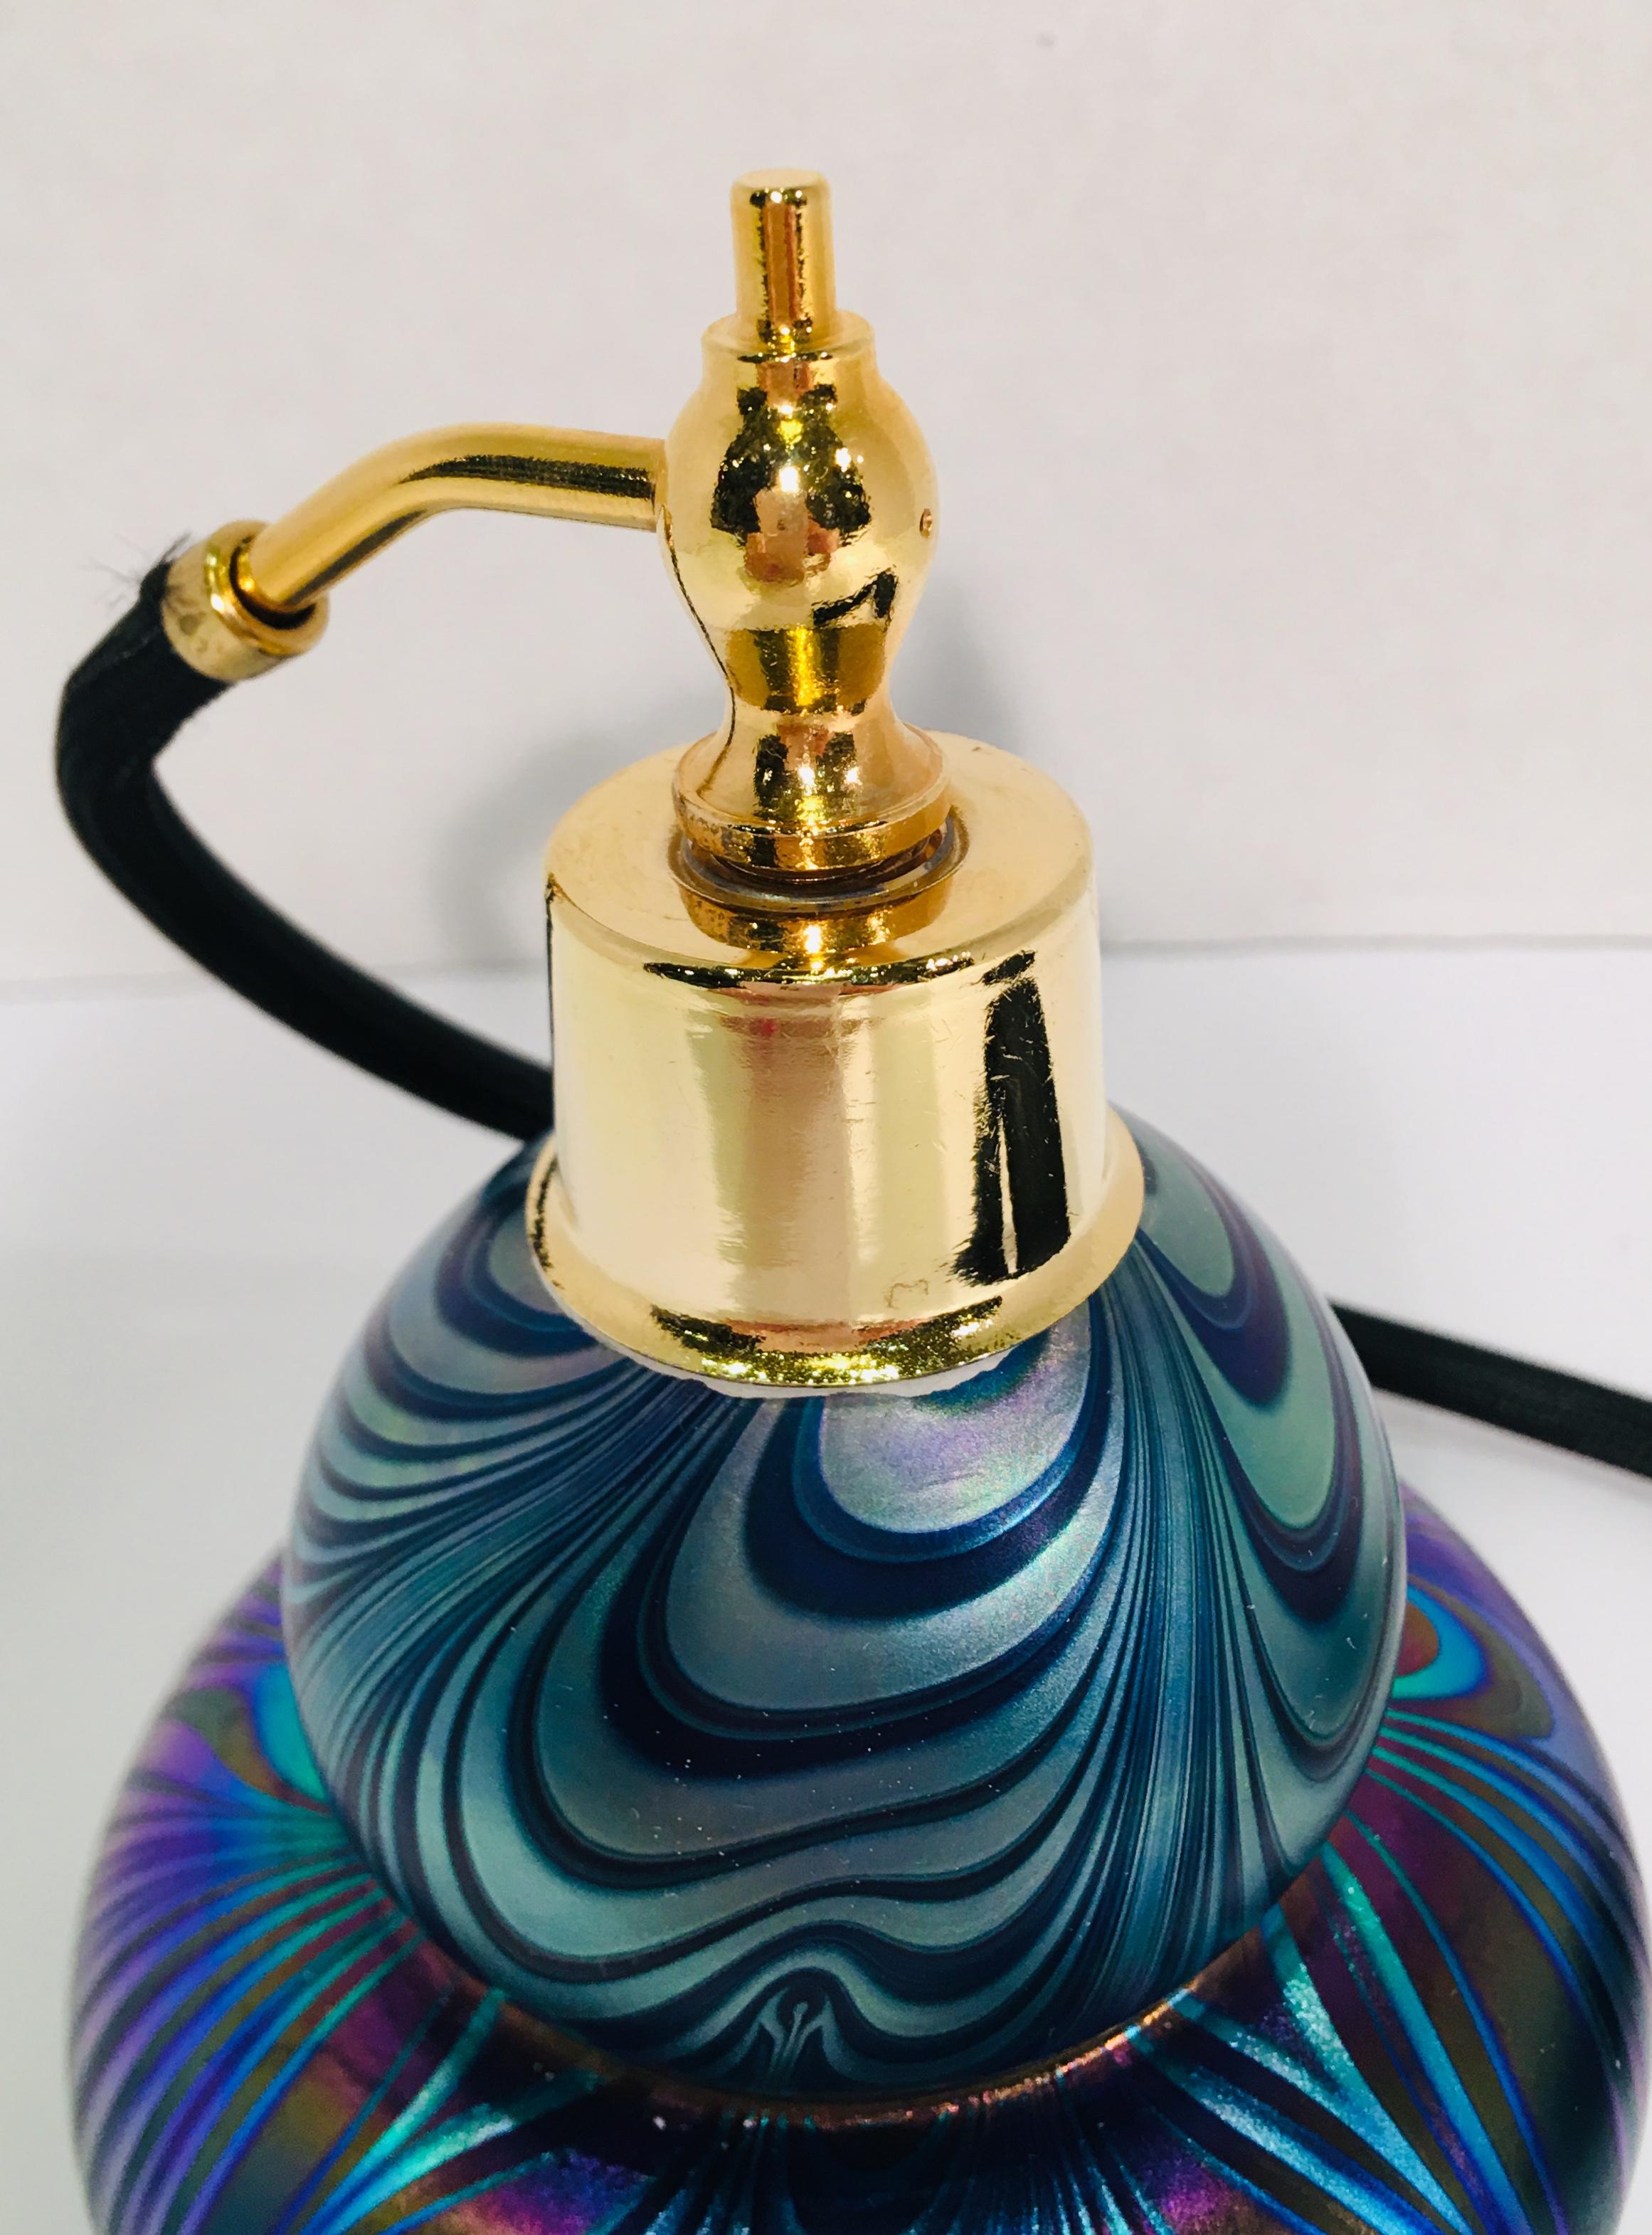 Handmade Austrian Art Glass Perfume Bottle Atomizer Signed Oskar Karla from 1986 In Excellent Condition For Sale In Tustin, CA